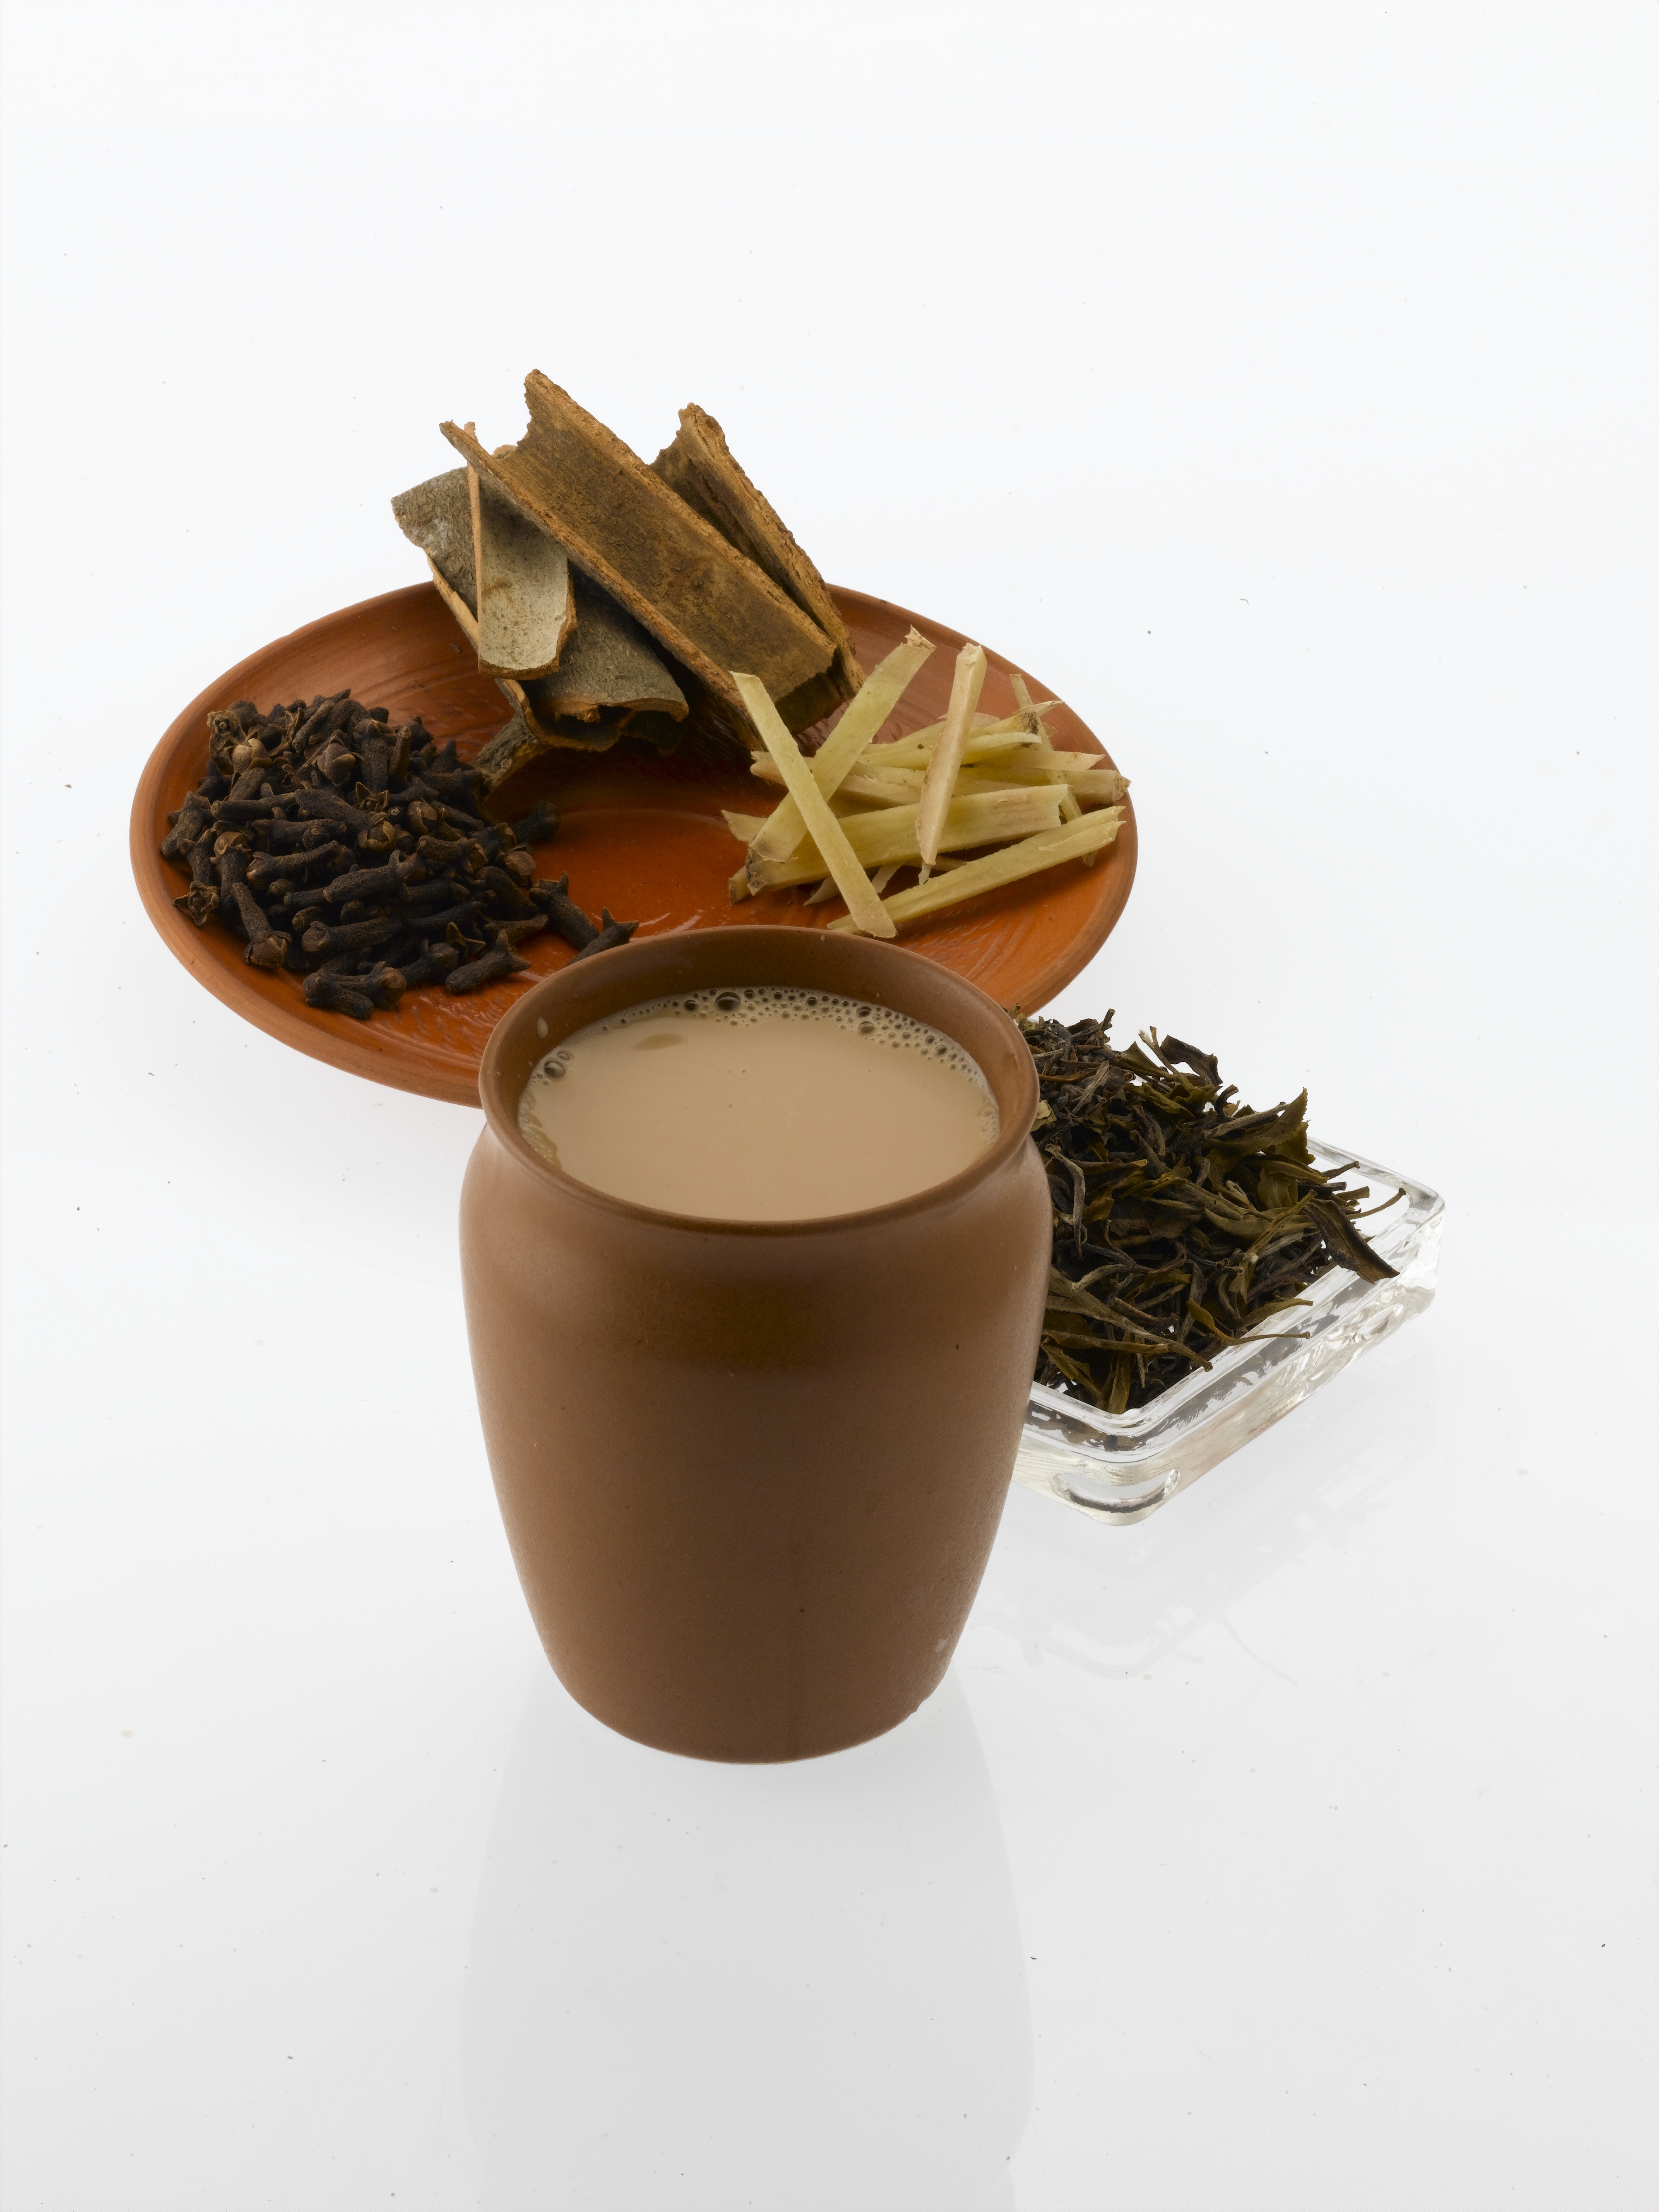 Chai cannot be described by just one word. Spicy, strong, malty, earthy – the list is never ending. Add a dash of cardamom, a hint of ginger, sprinkle some cinnamon, the possibilities are endless.